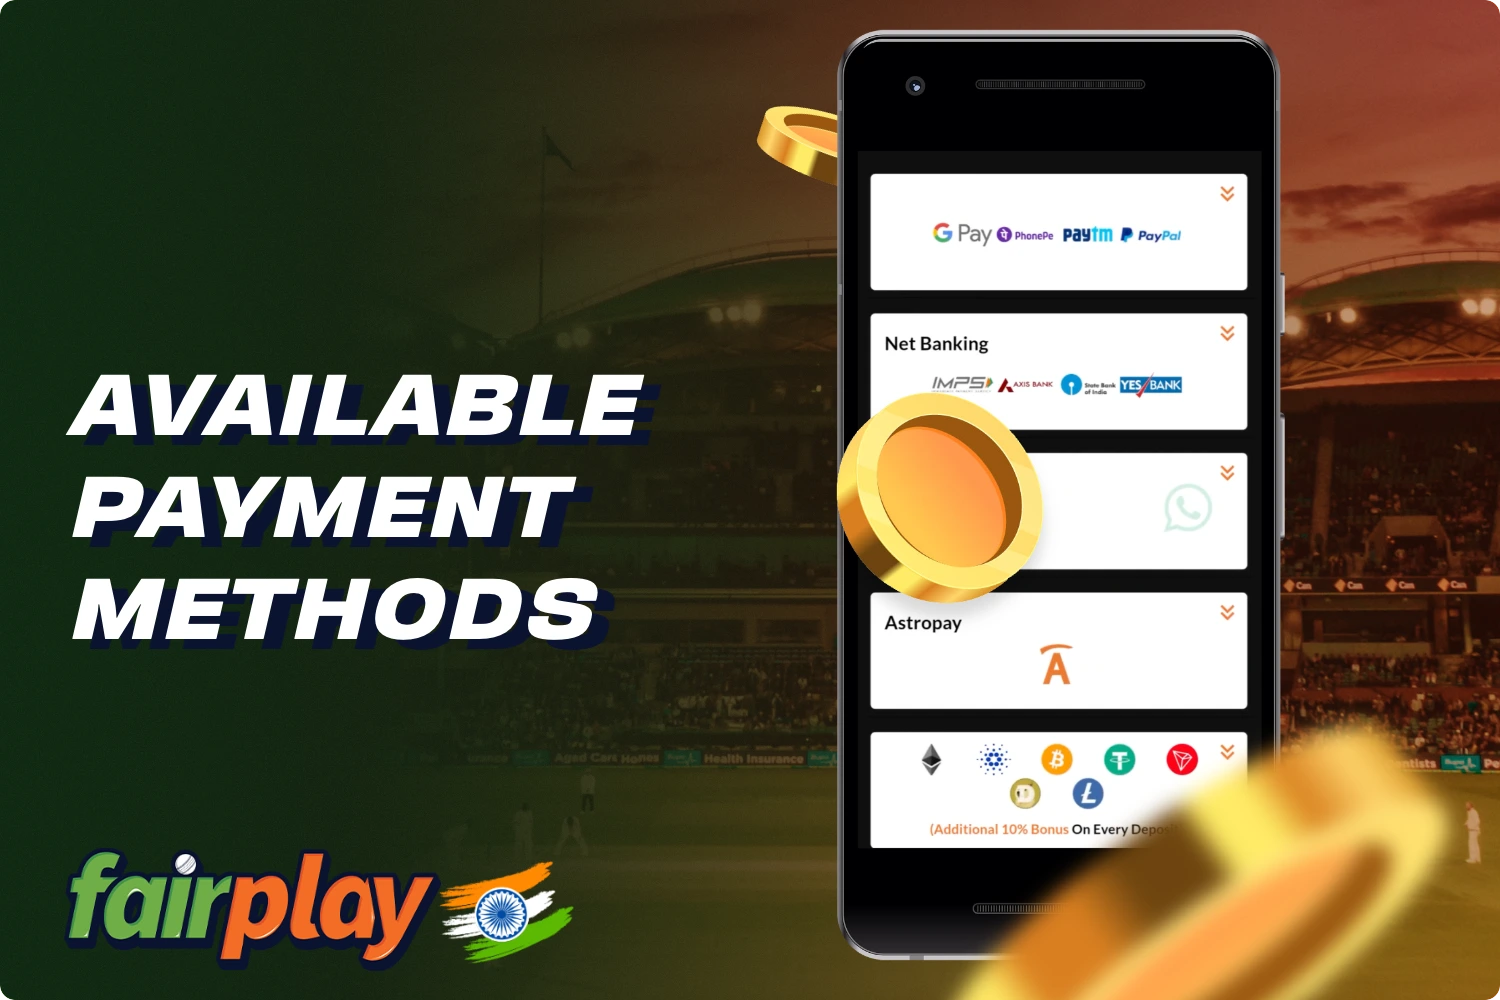 A variety of payment options are available at Fairplay Fantasy for the convenience of users